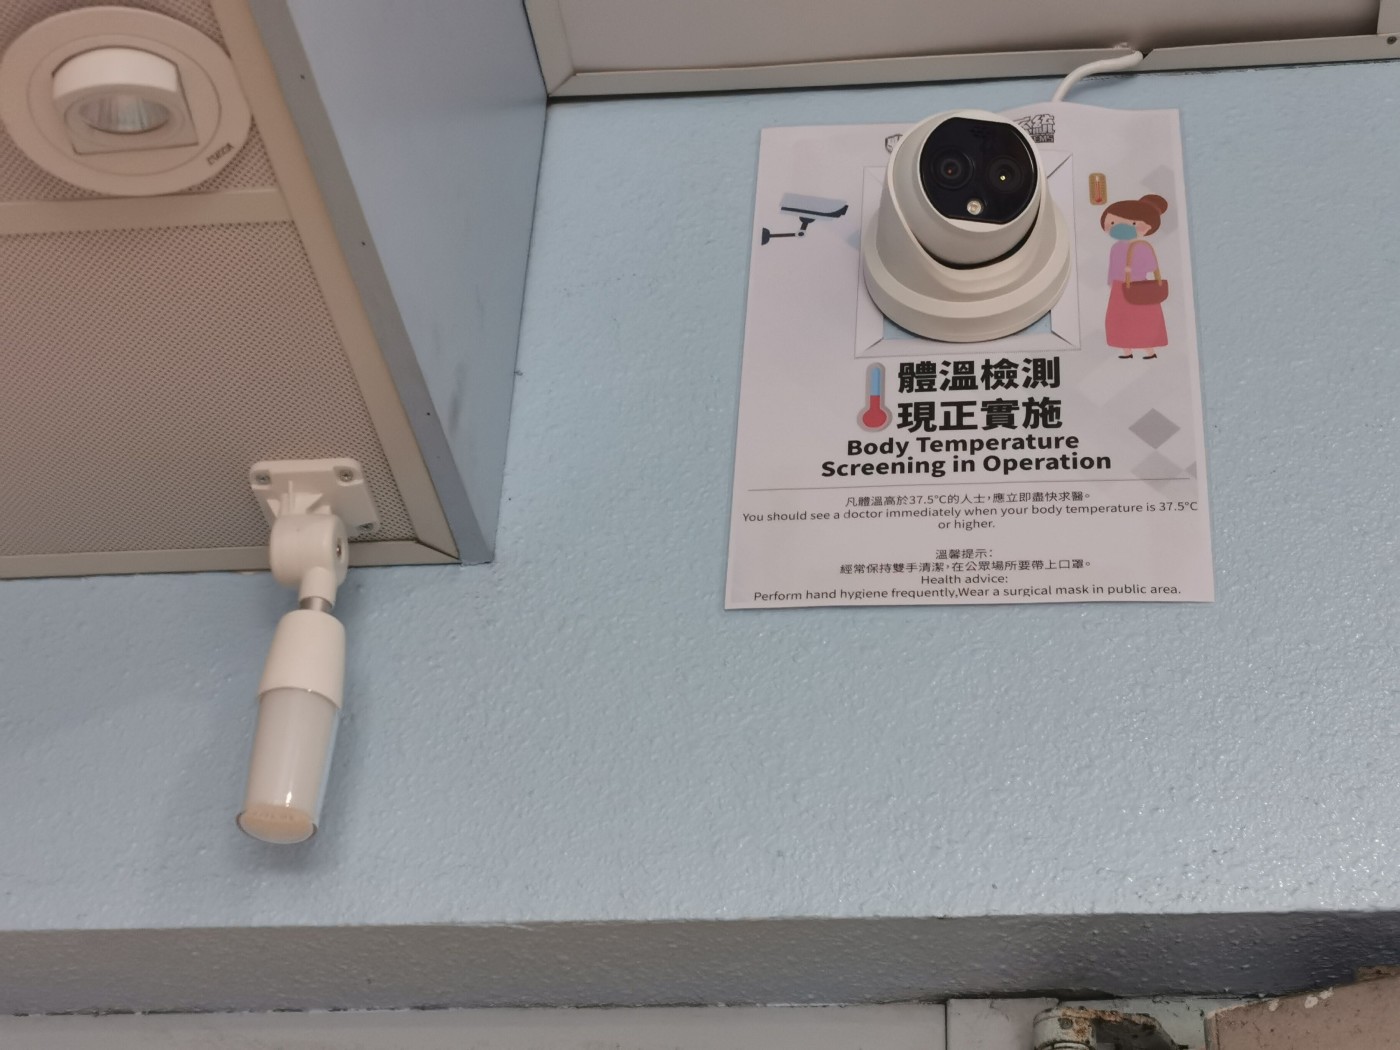 Body Temperature Screening Solution Setup References-Extra Signal Alarm Light with Ceiling Mounted